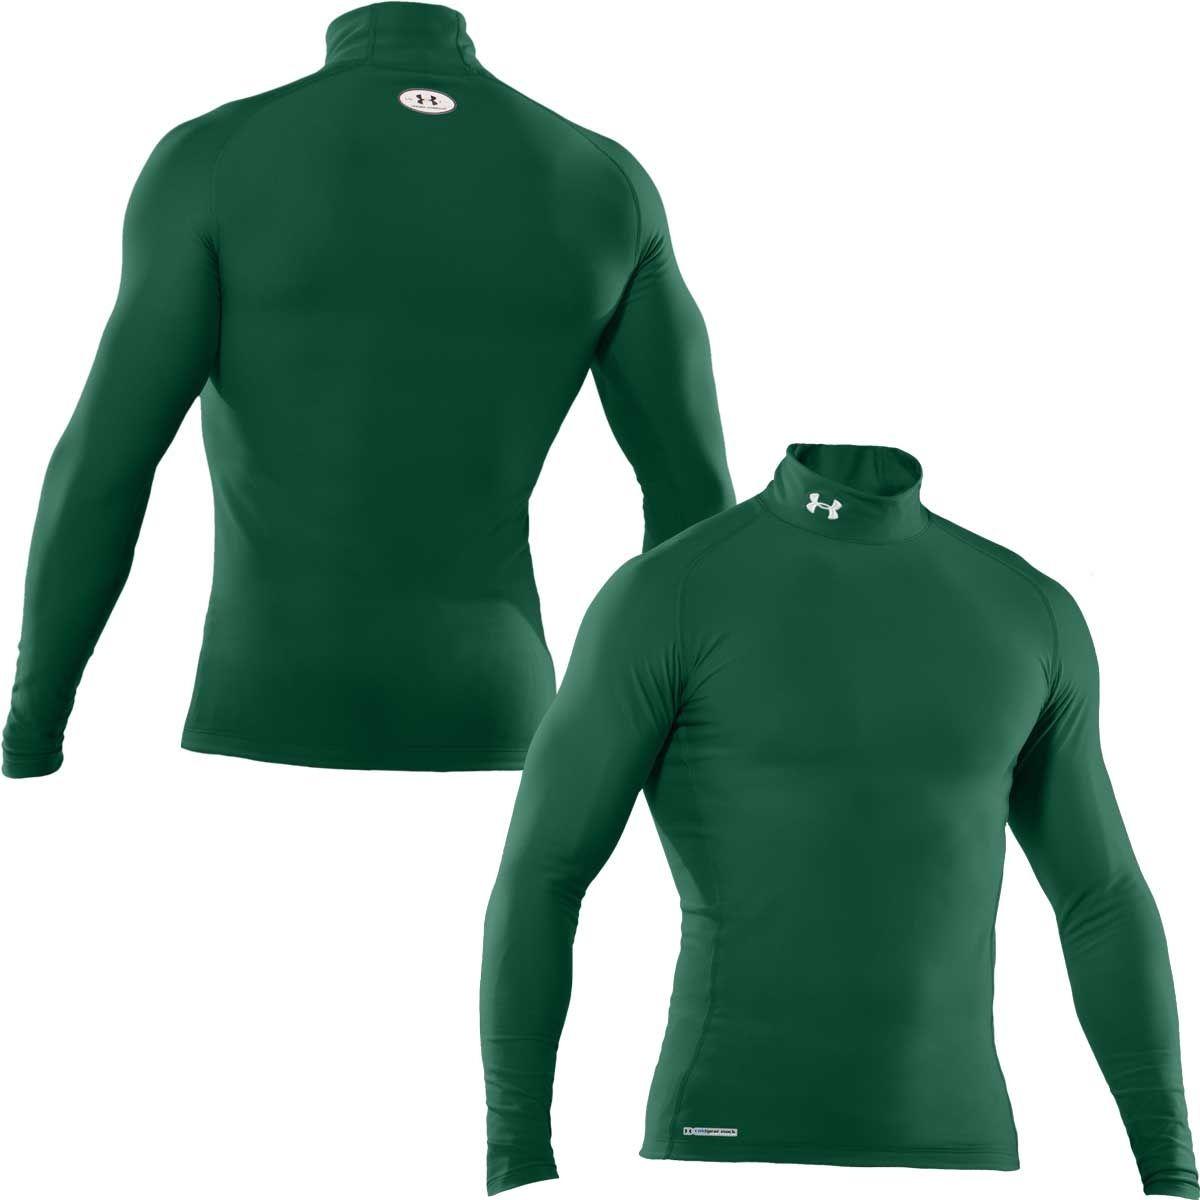 Cool Under Armour Green Logo - Under Armour EVO Coldgear Compression Mock - Mens - Forest Green ...